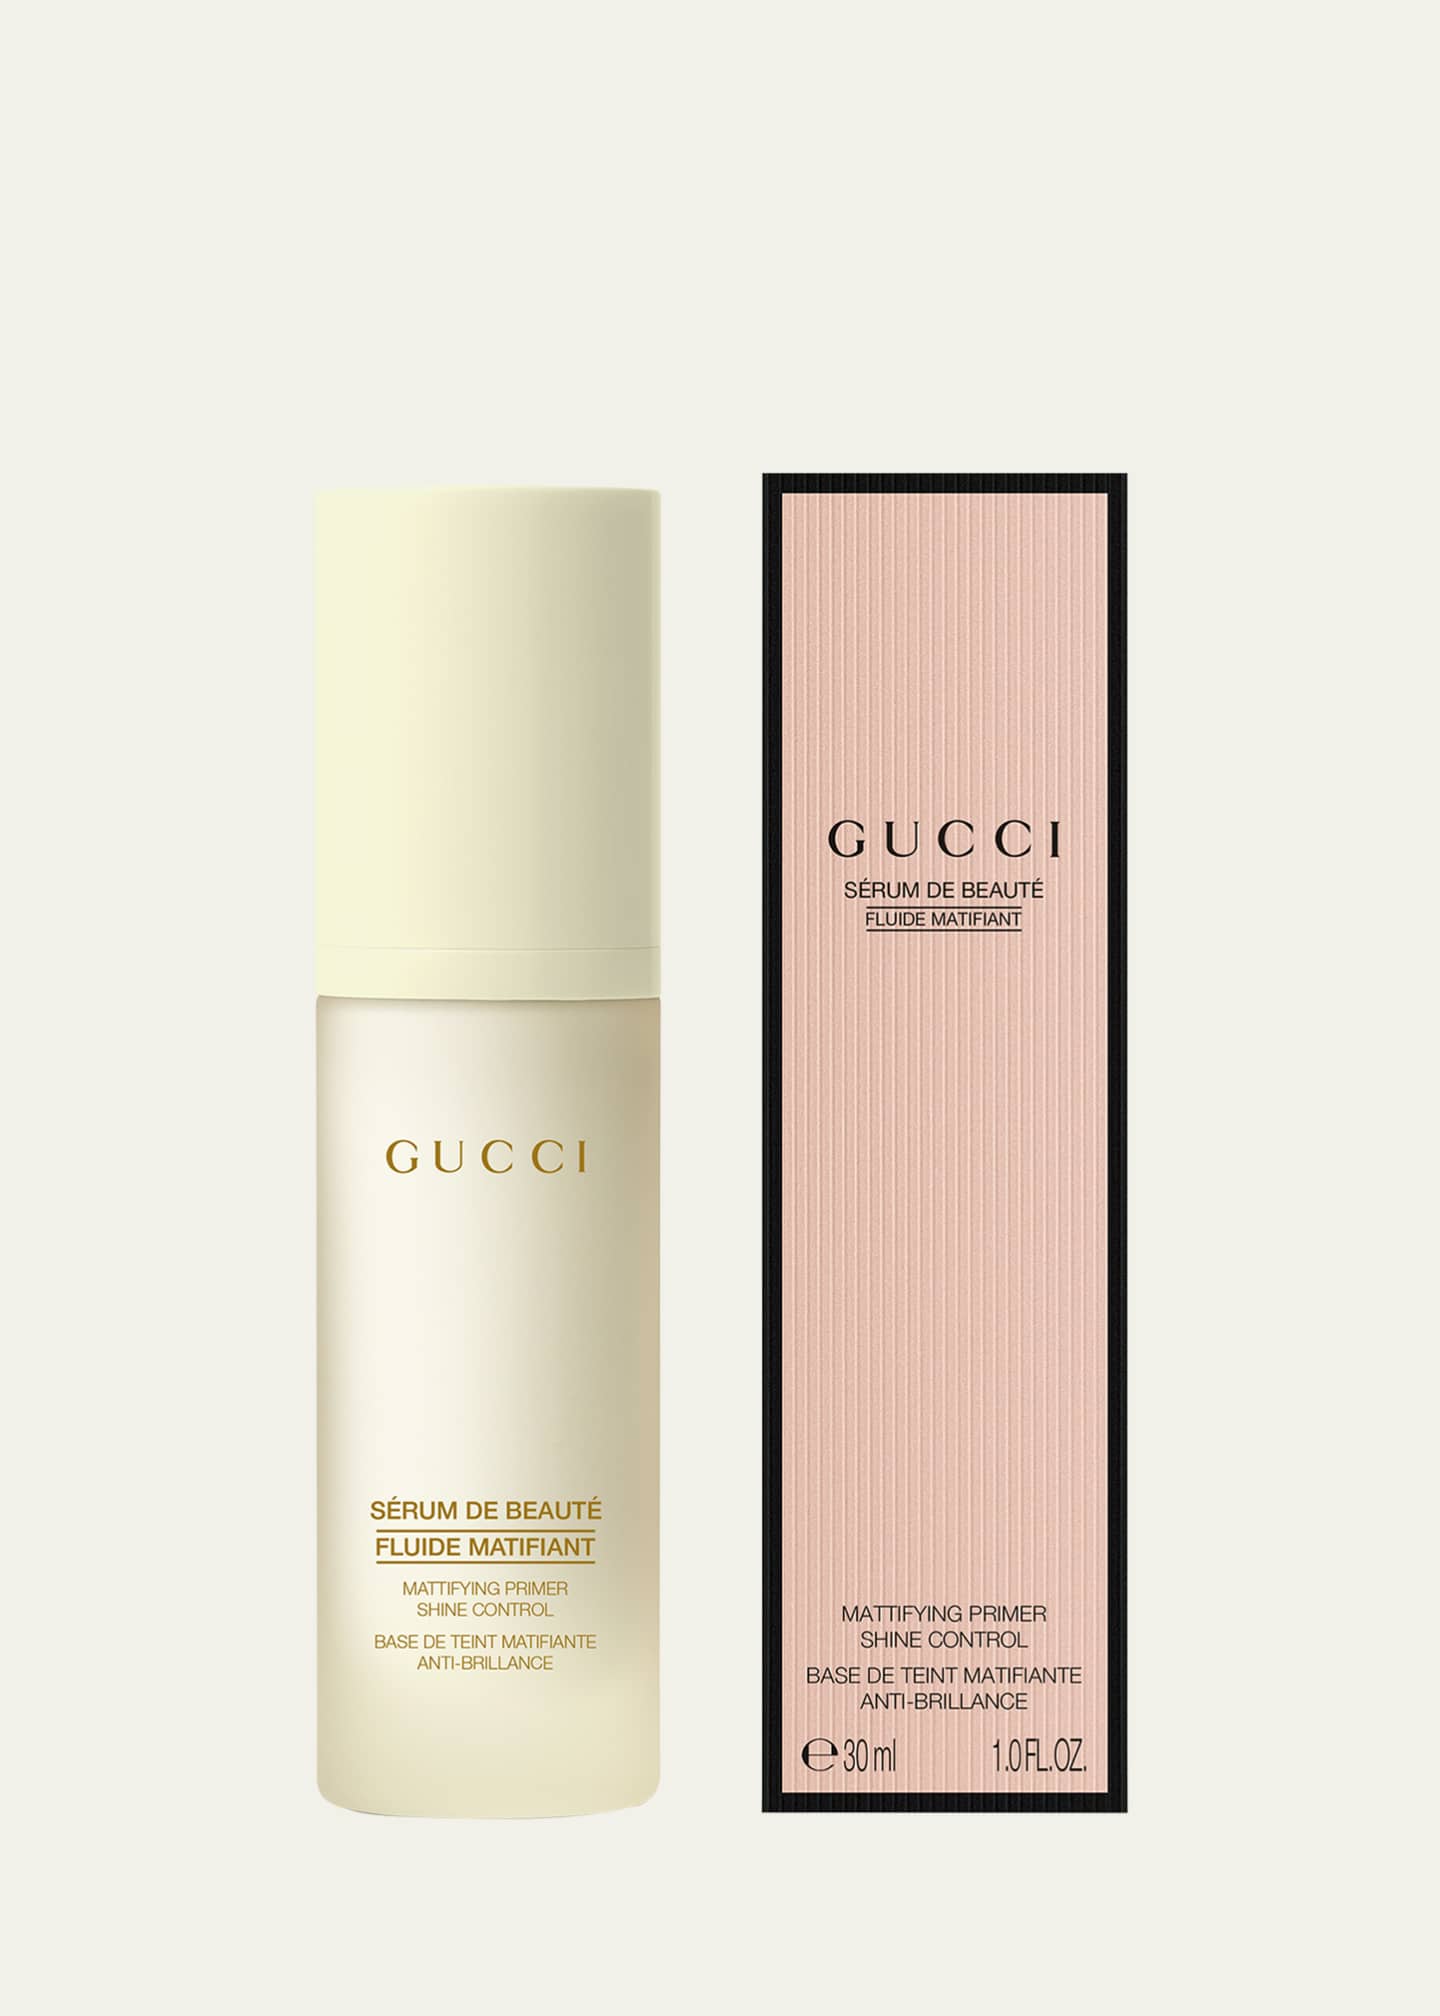 Logo and Texture Gucci Luxury Editorial Stock Photo - Image of